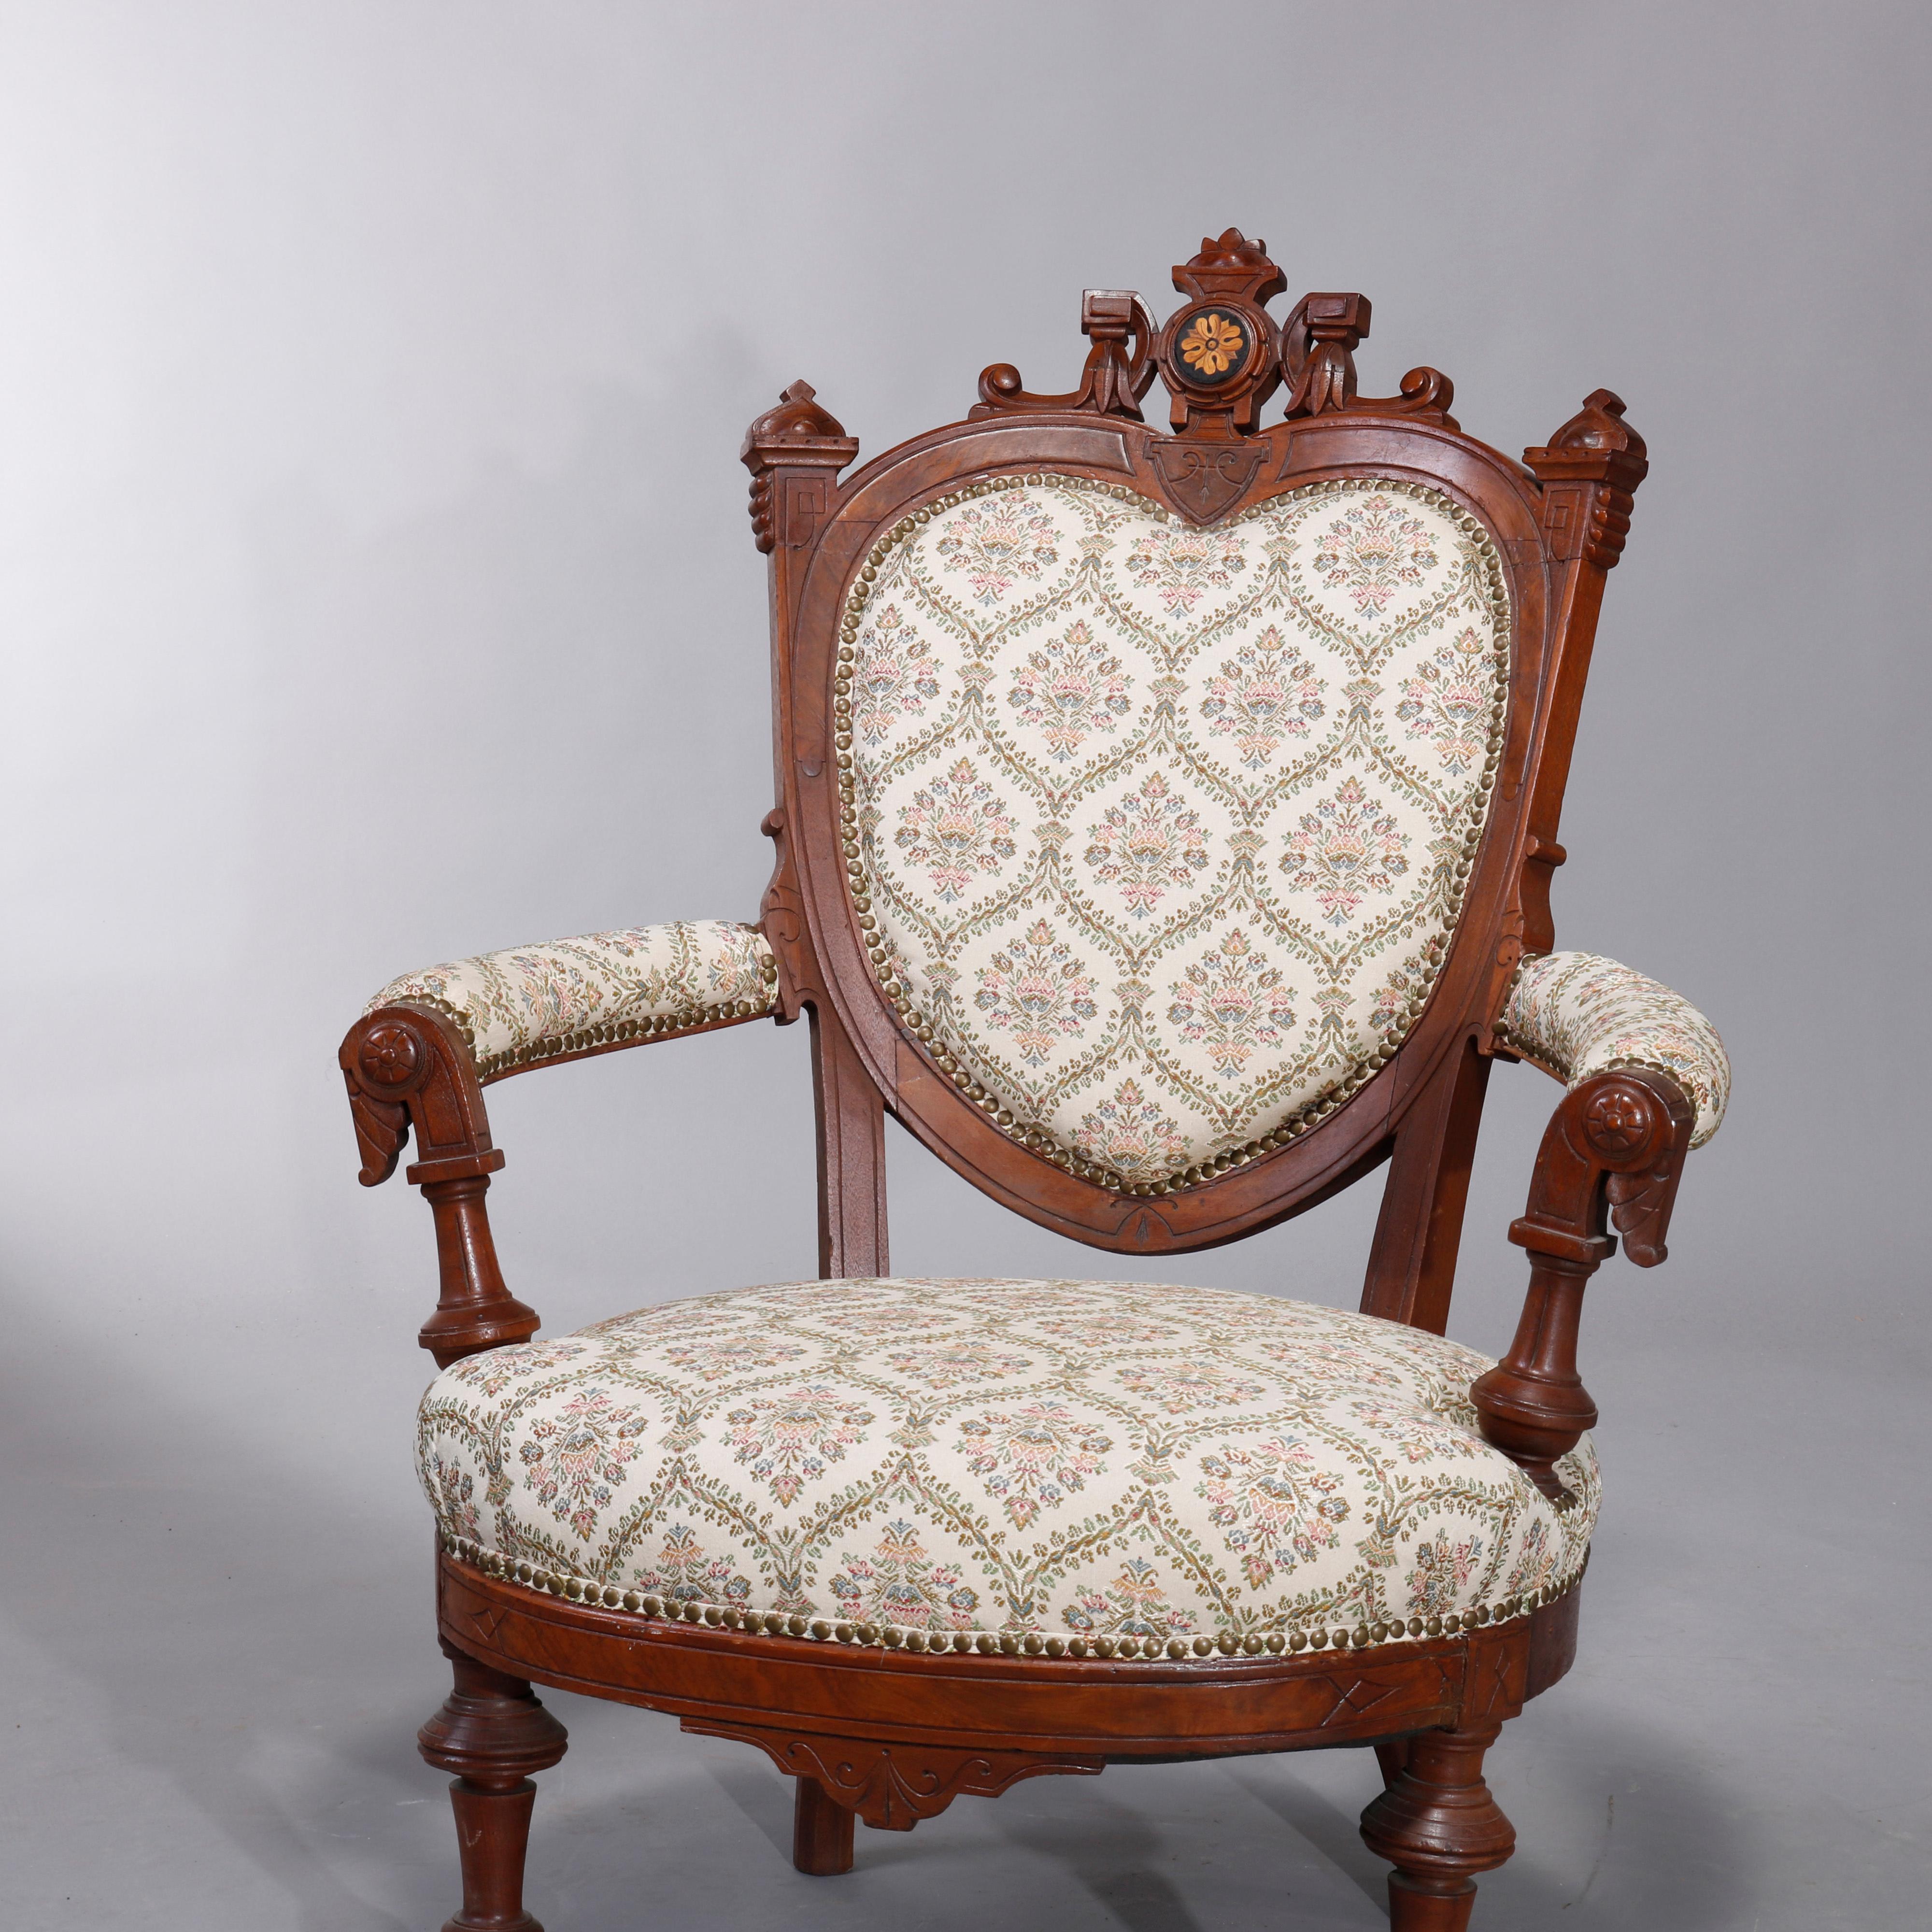 Carved Antique Renaissance Revival Walnut & Burl Parlor Armchairs with Marquetry, c1880 For Sale